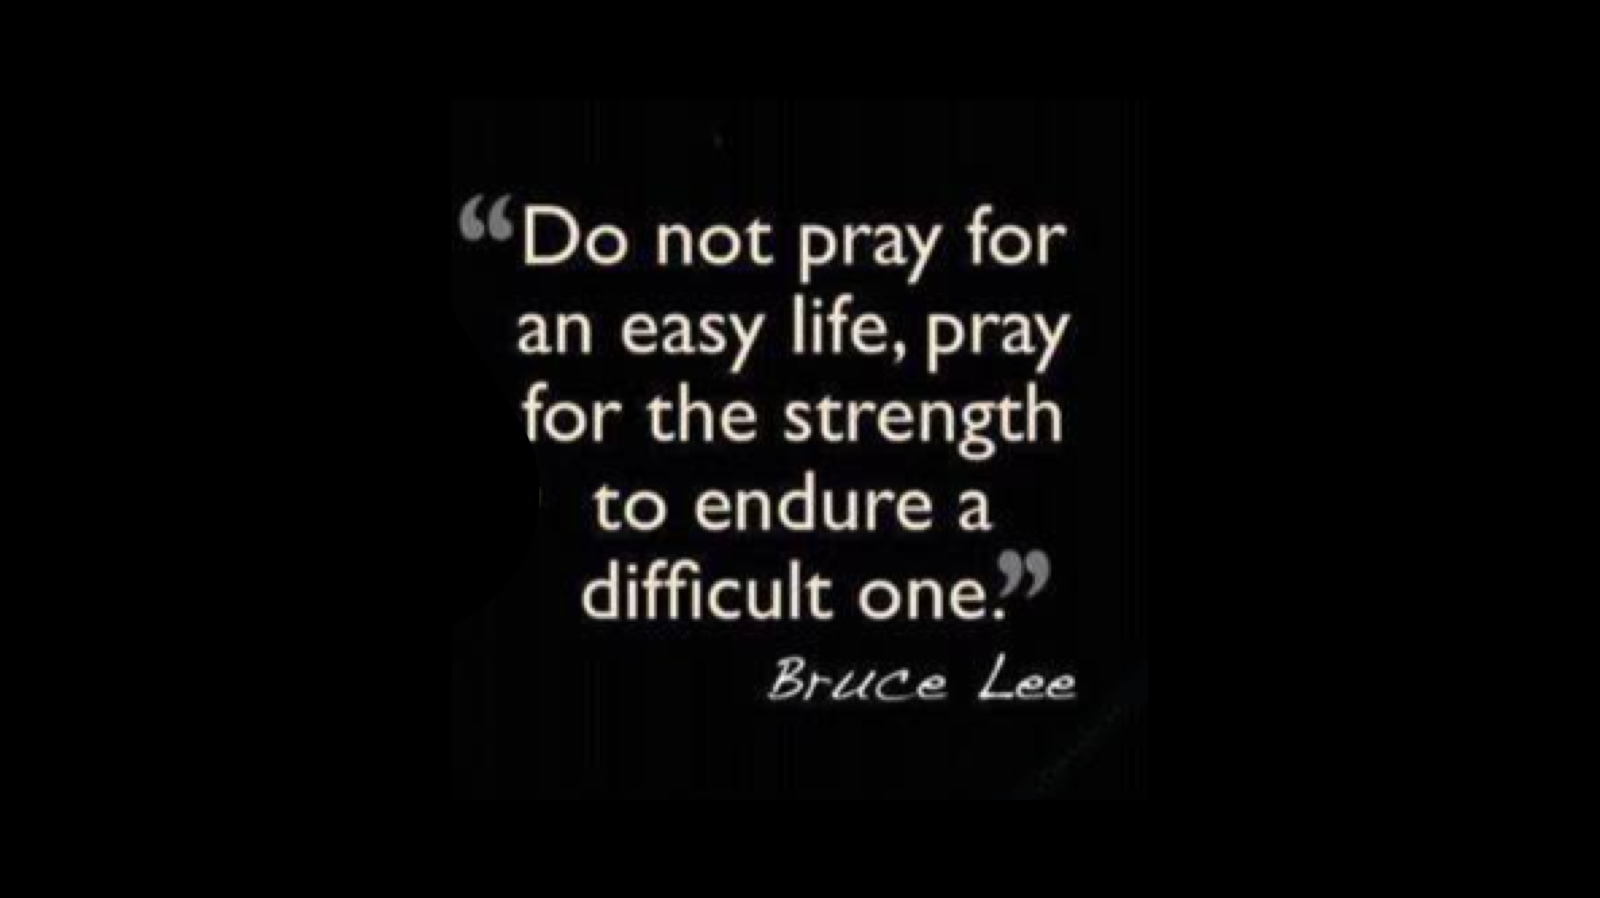 Do not pray for an easy life; pray for the strength to endure a difficult one.”

-Bruce Lee